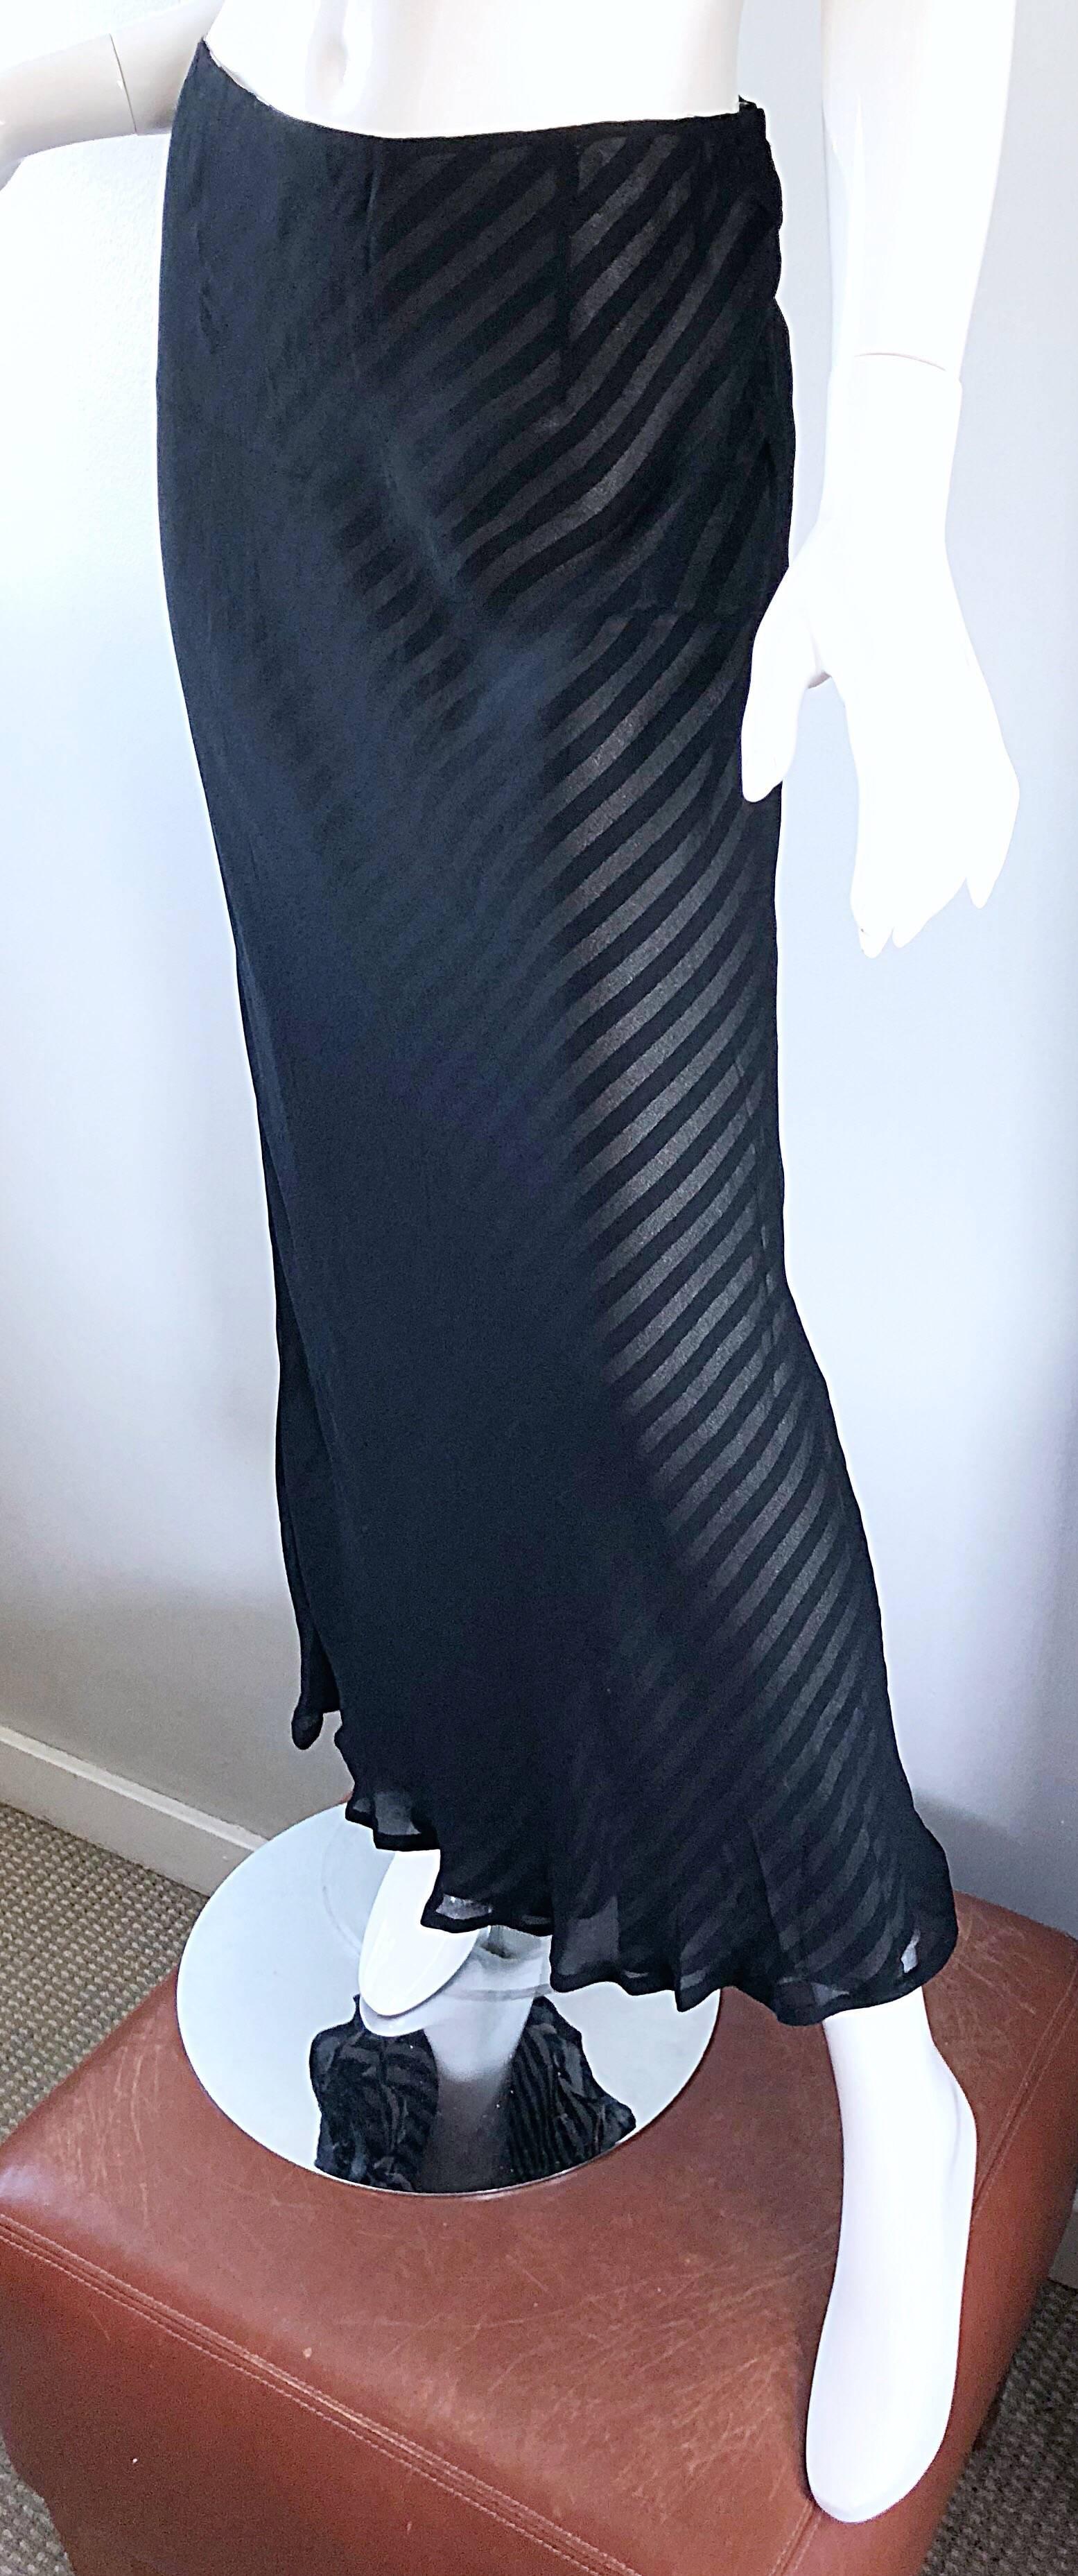 Moschino Cheap & Chic 1990s Size 12 Black and White Striped Vintage Maxi Skirt For Sale 1